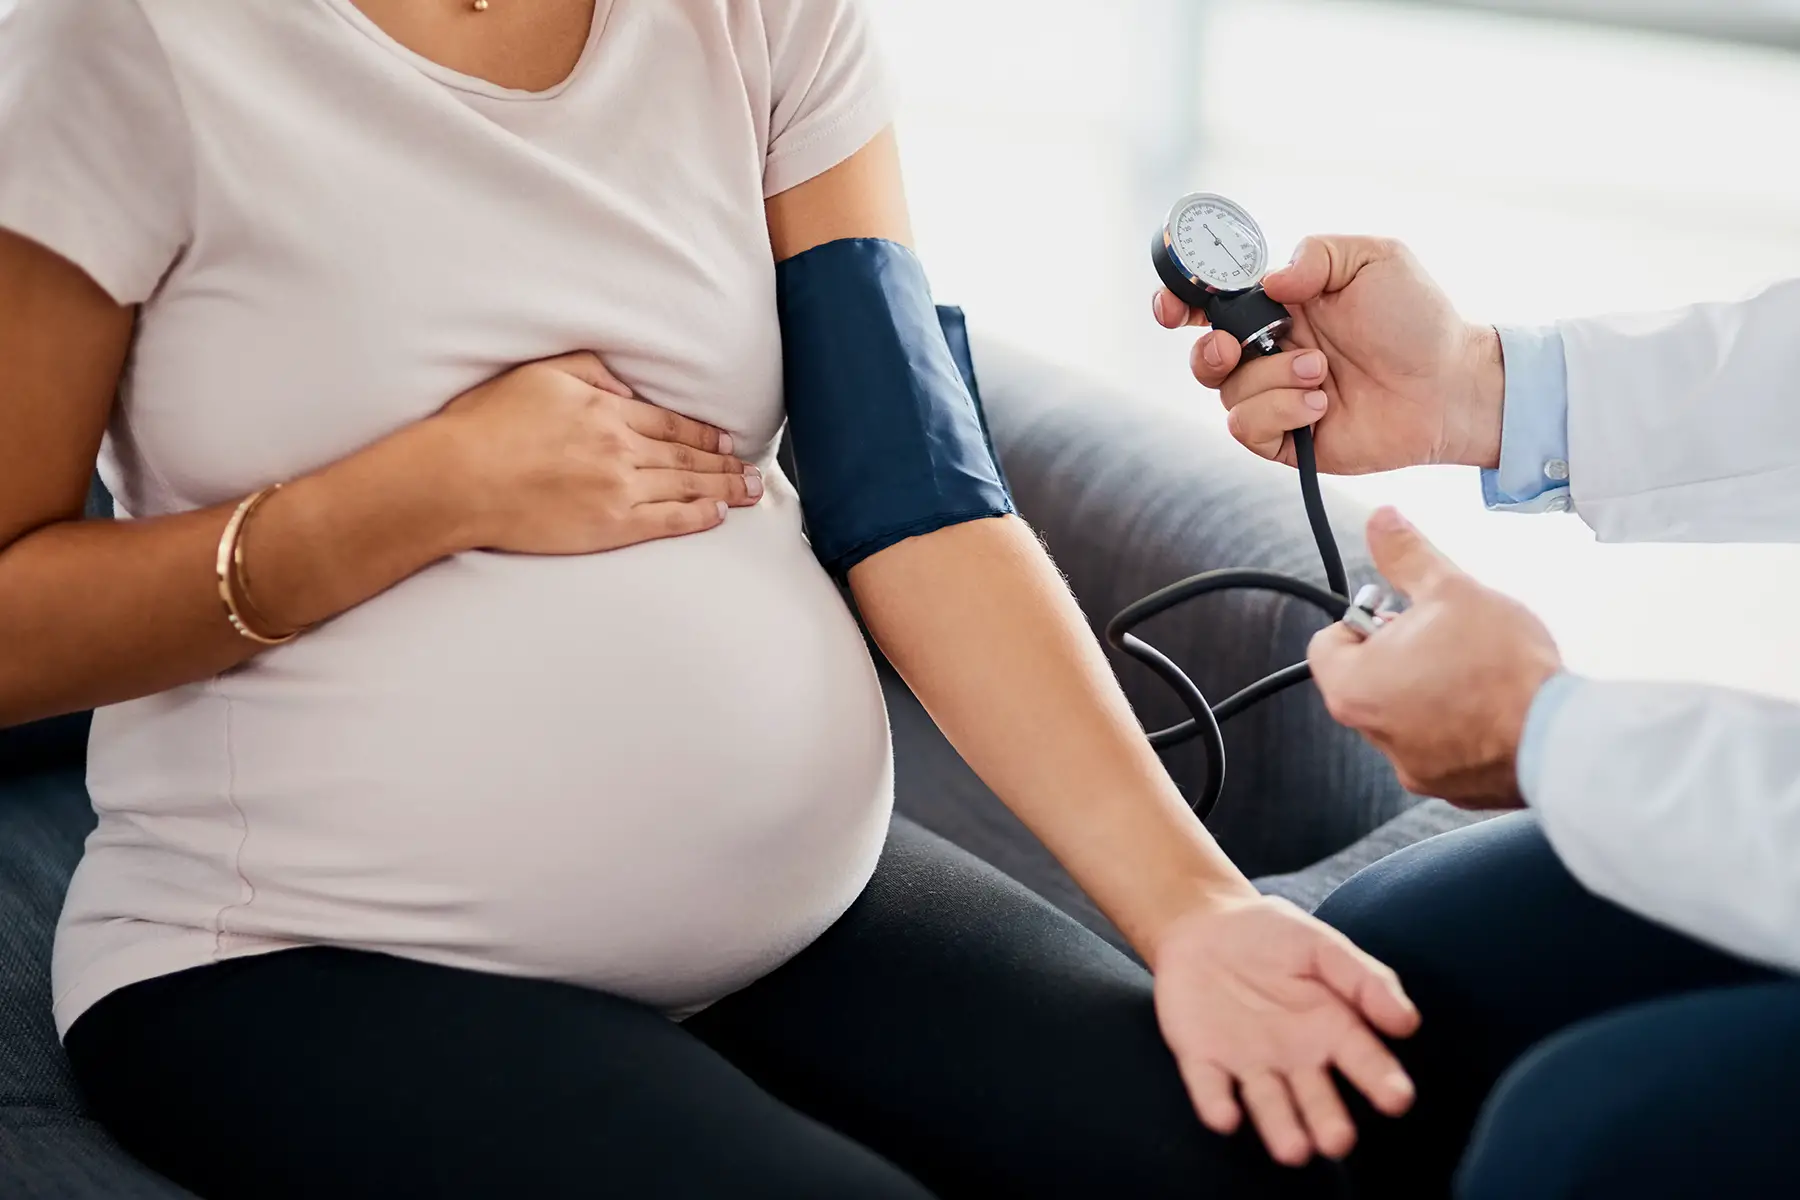 A pregnant woman getting her blood pressure measured